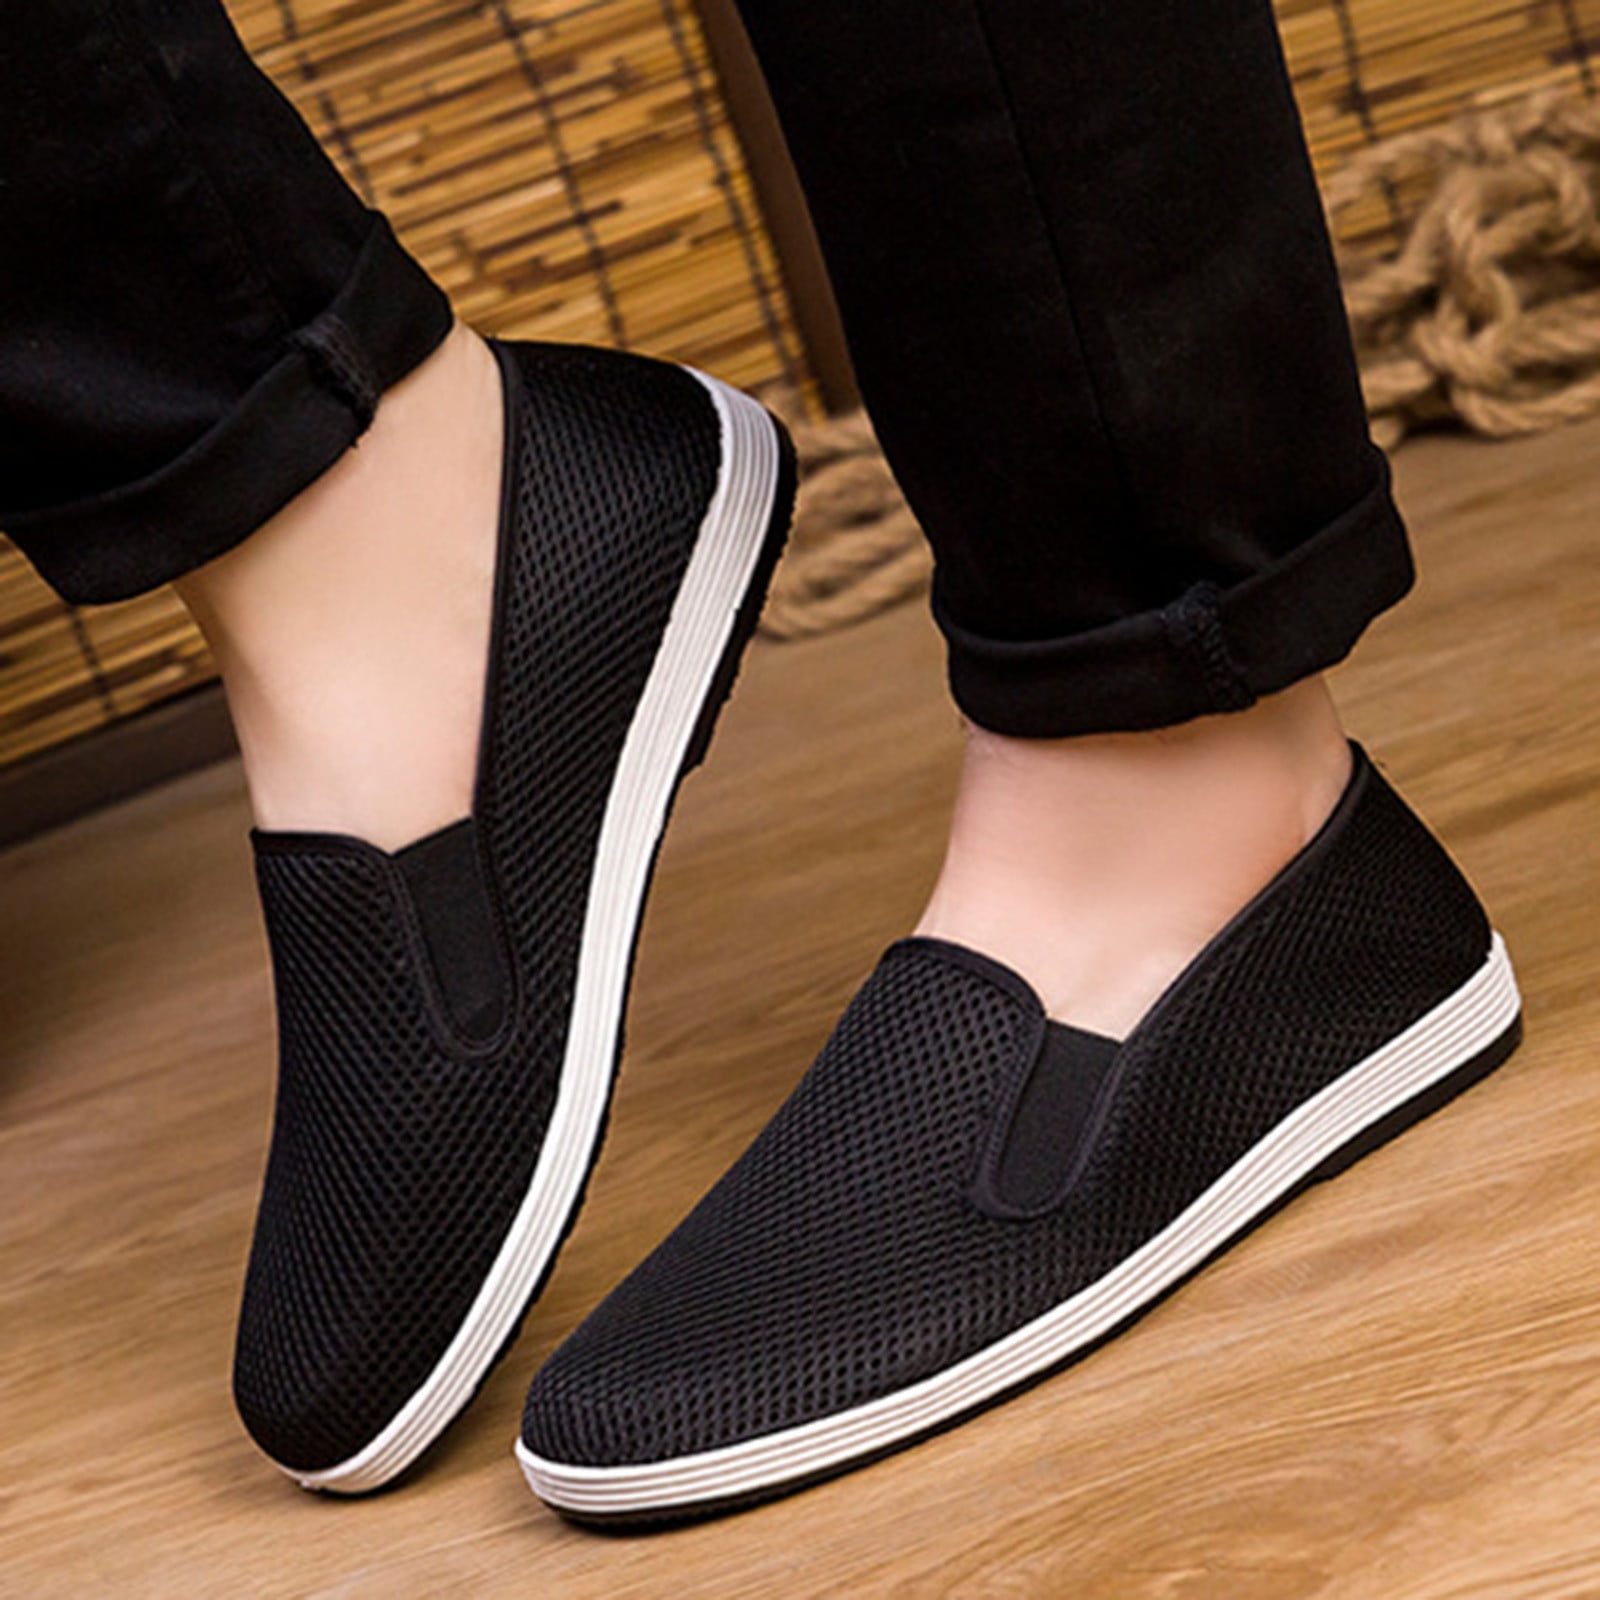 Men Leisure Non Slip US 8 Casual Shoes Slip On Loafers Round Toe Walking  Shoes